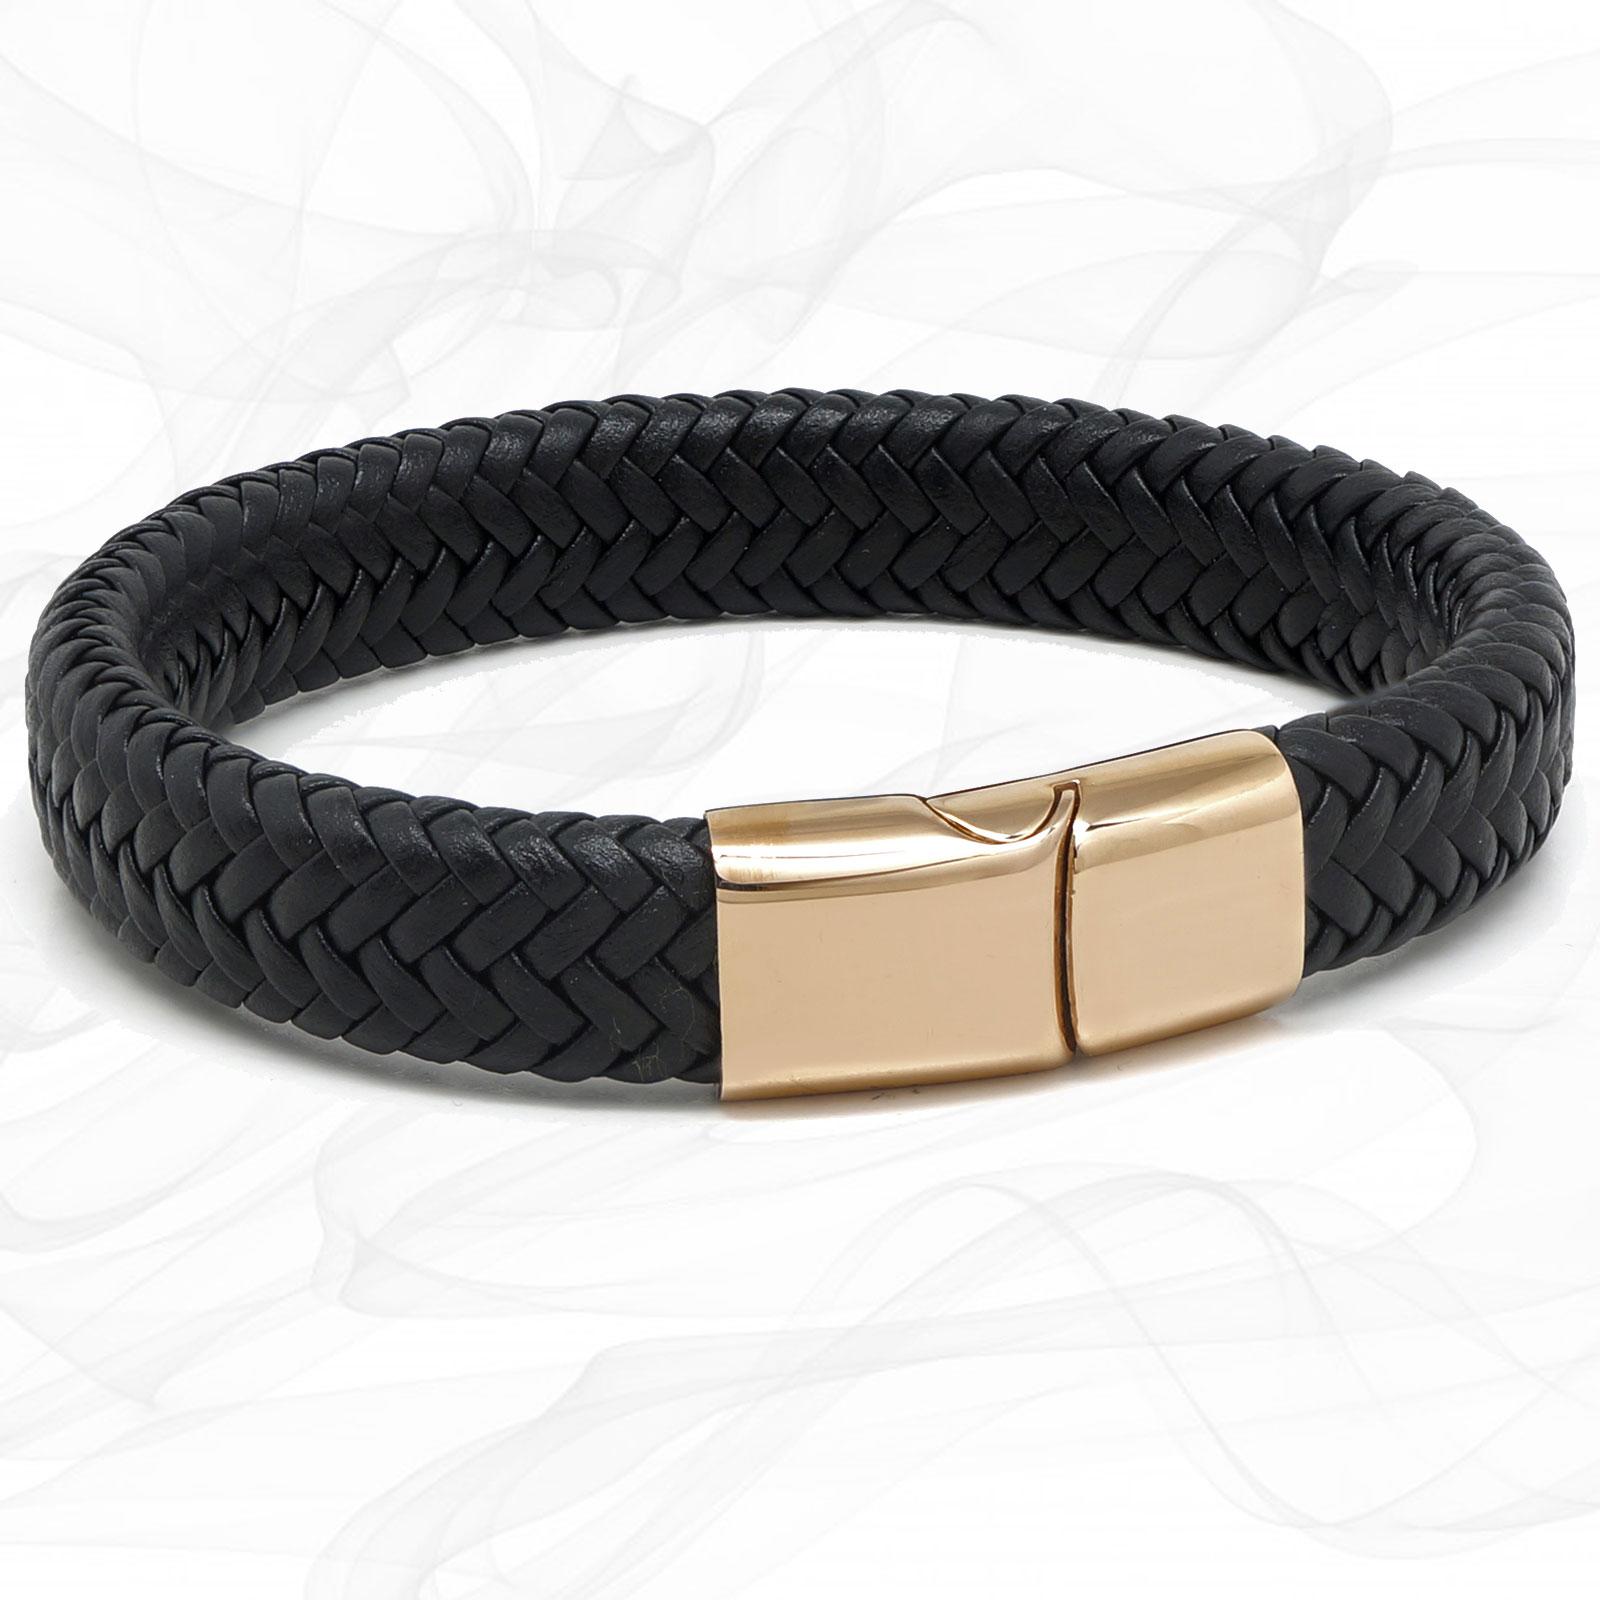 Chunky Black Super Soft Premium Leather Bracelet with a Rose Gold Sliding Magnetic Clasp.